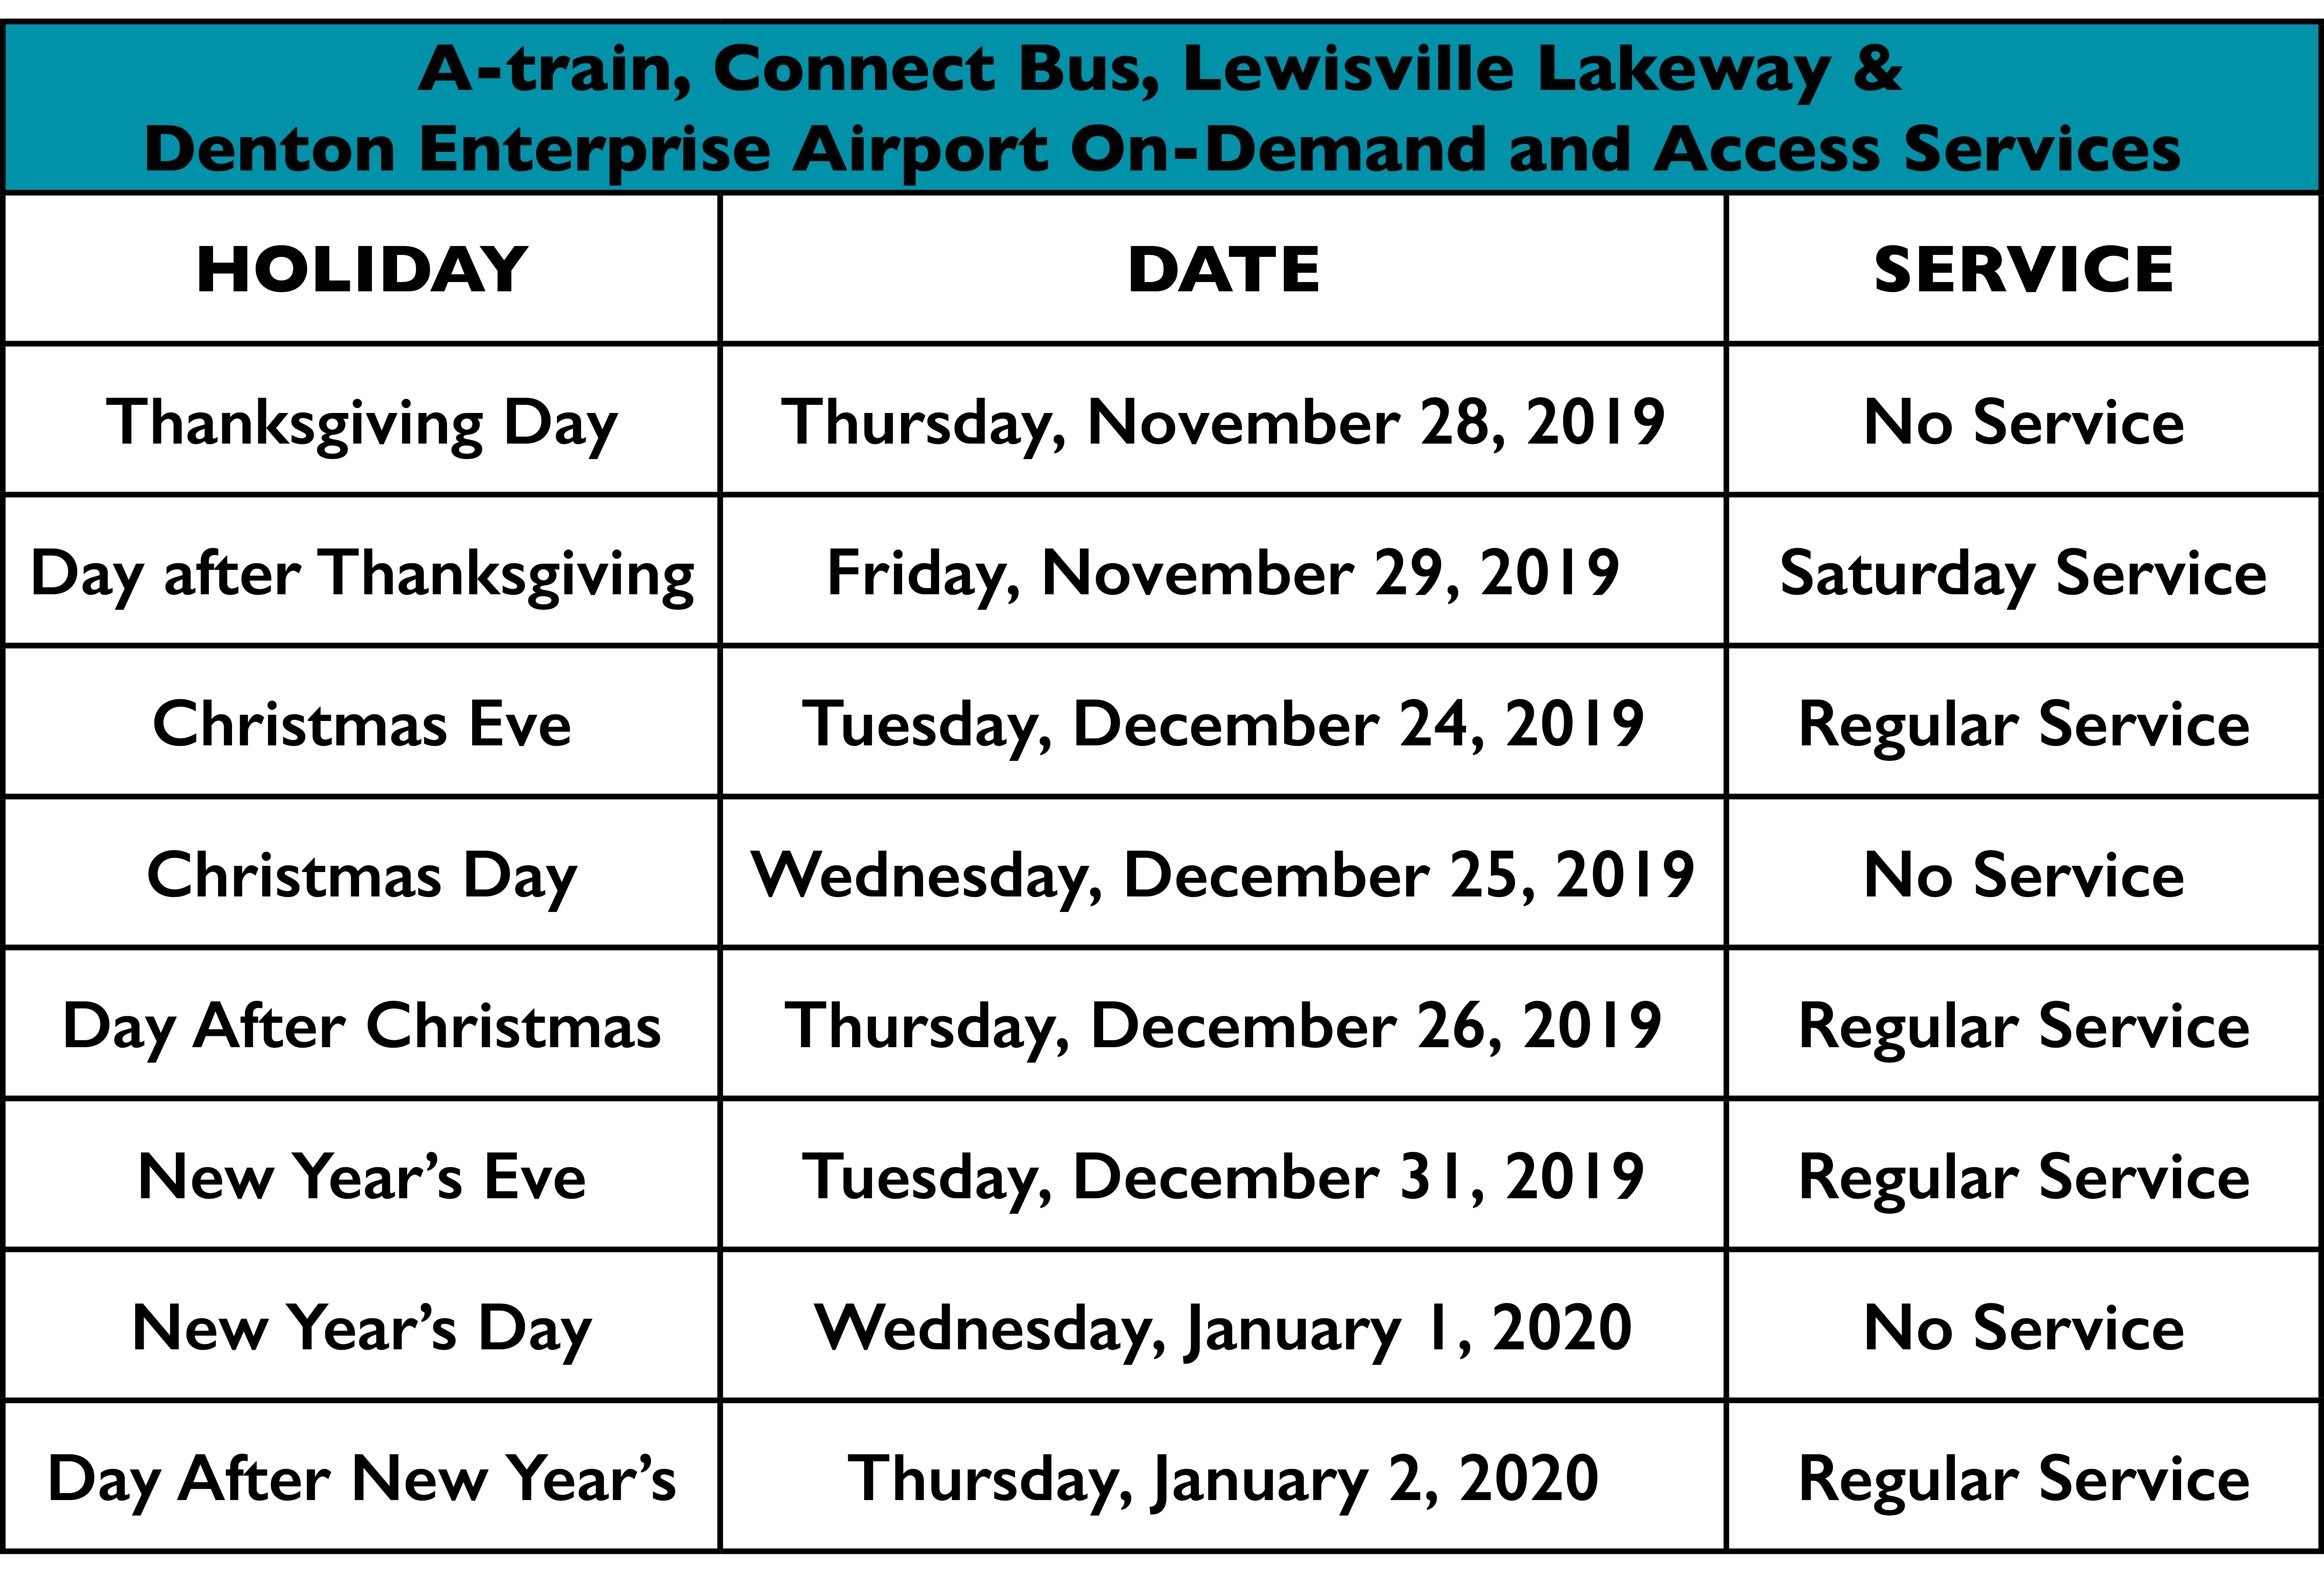 A-train, Connect Bus, Lewisville Lakeway and Denton Enterprise Airport on-Demand and Access Services •	Thanksgiving Day (Thursday, November 28, 2019) – No Service •	Day After Thanksgiving (Friday, November 29, 2019) – Saturday Service •	Christmas Eve (Tuesday, December 24, 2019) –Regular Service •	Christmas Day (Wednesday, December 25, 2019) – No Service •	Day After Christmas (Thursday, December 26, 2019) – Regular Service •	New Year's Eve (Tuesday, December 31, 2019) – Regular Service •	New Year's Day (Wednesday, January 1, 2020) – No Service  •	Day After New Year’s (Thursday, January 2, 2020) – Regular Service